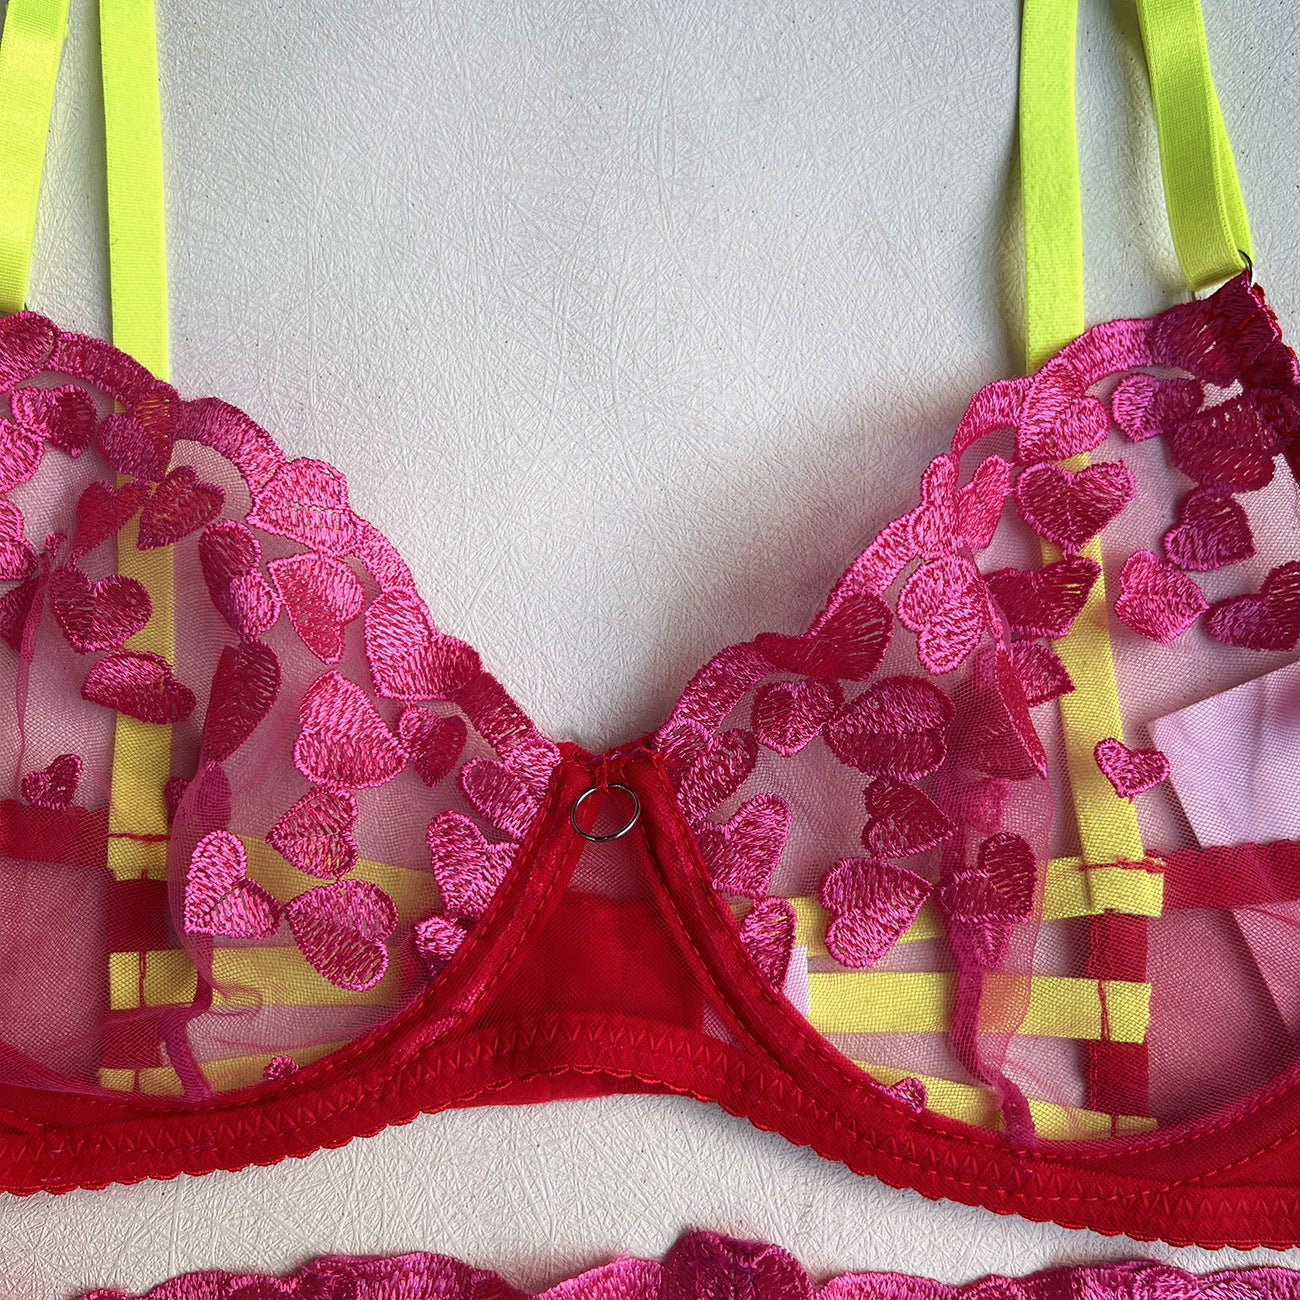 Neon Love Affair: Bright Pink Lingerie Set with Heart Embroidery, Neon Yellow Accents, and Playful Ruffles